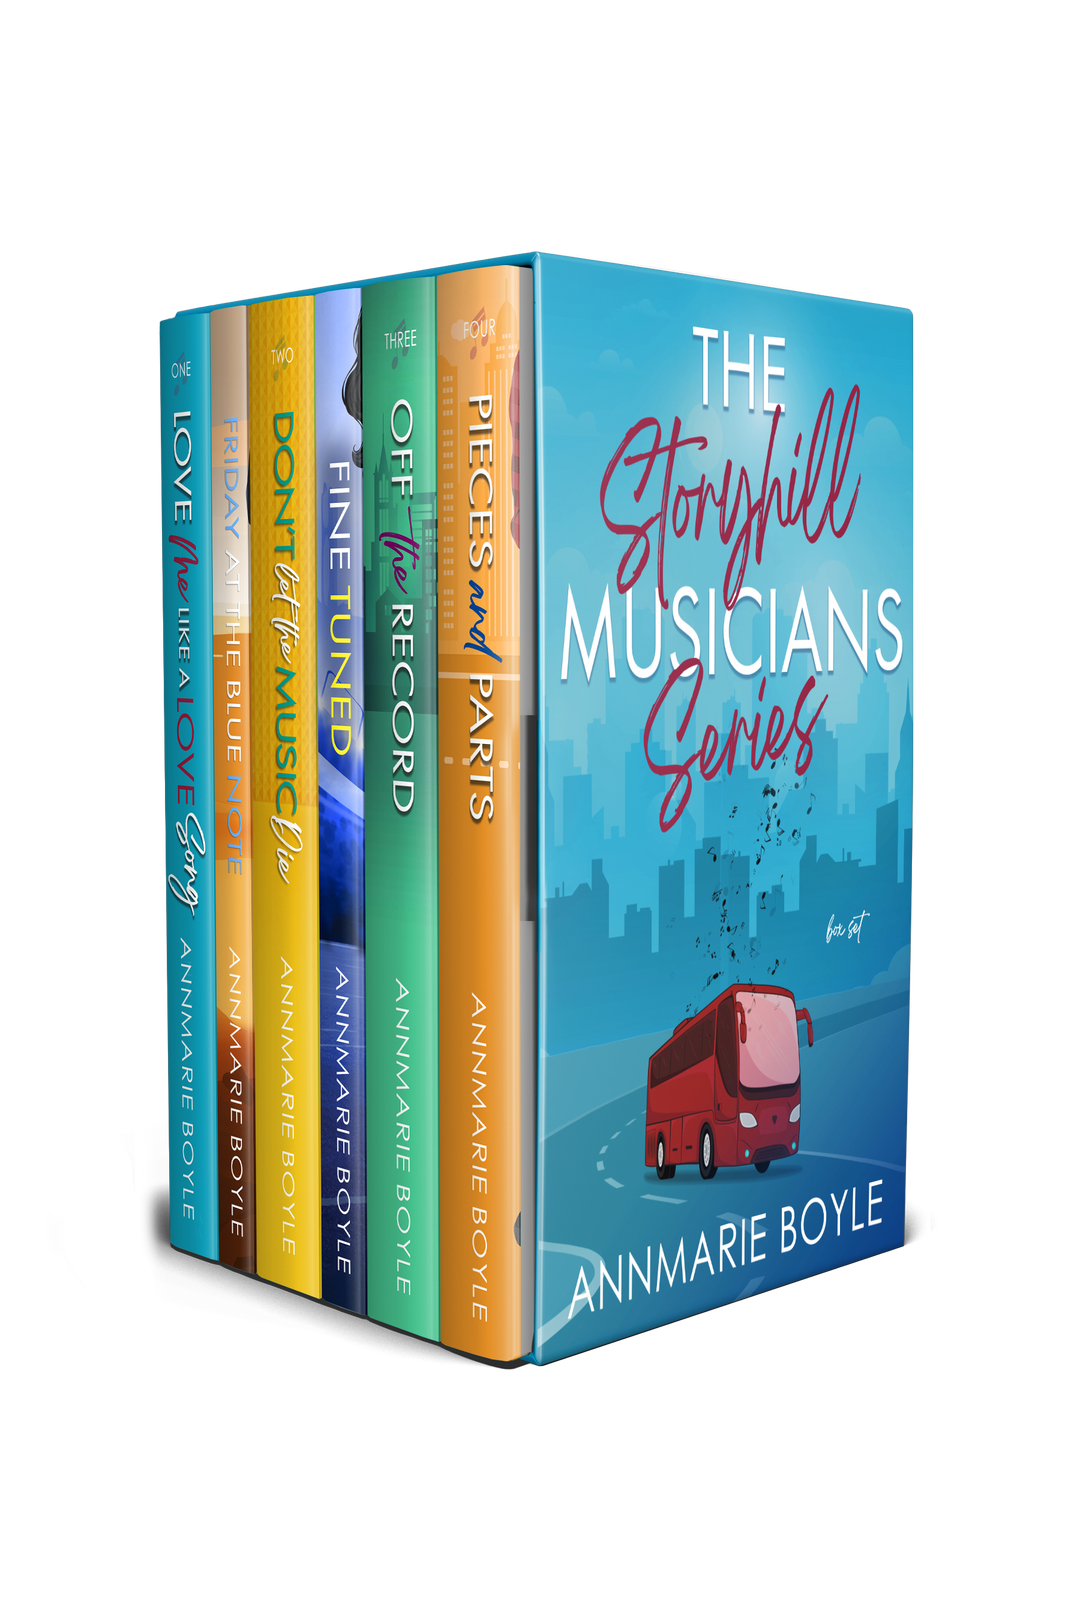 Complete paperback set of the Storyhill Musicians contemporary romance series